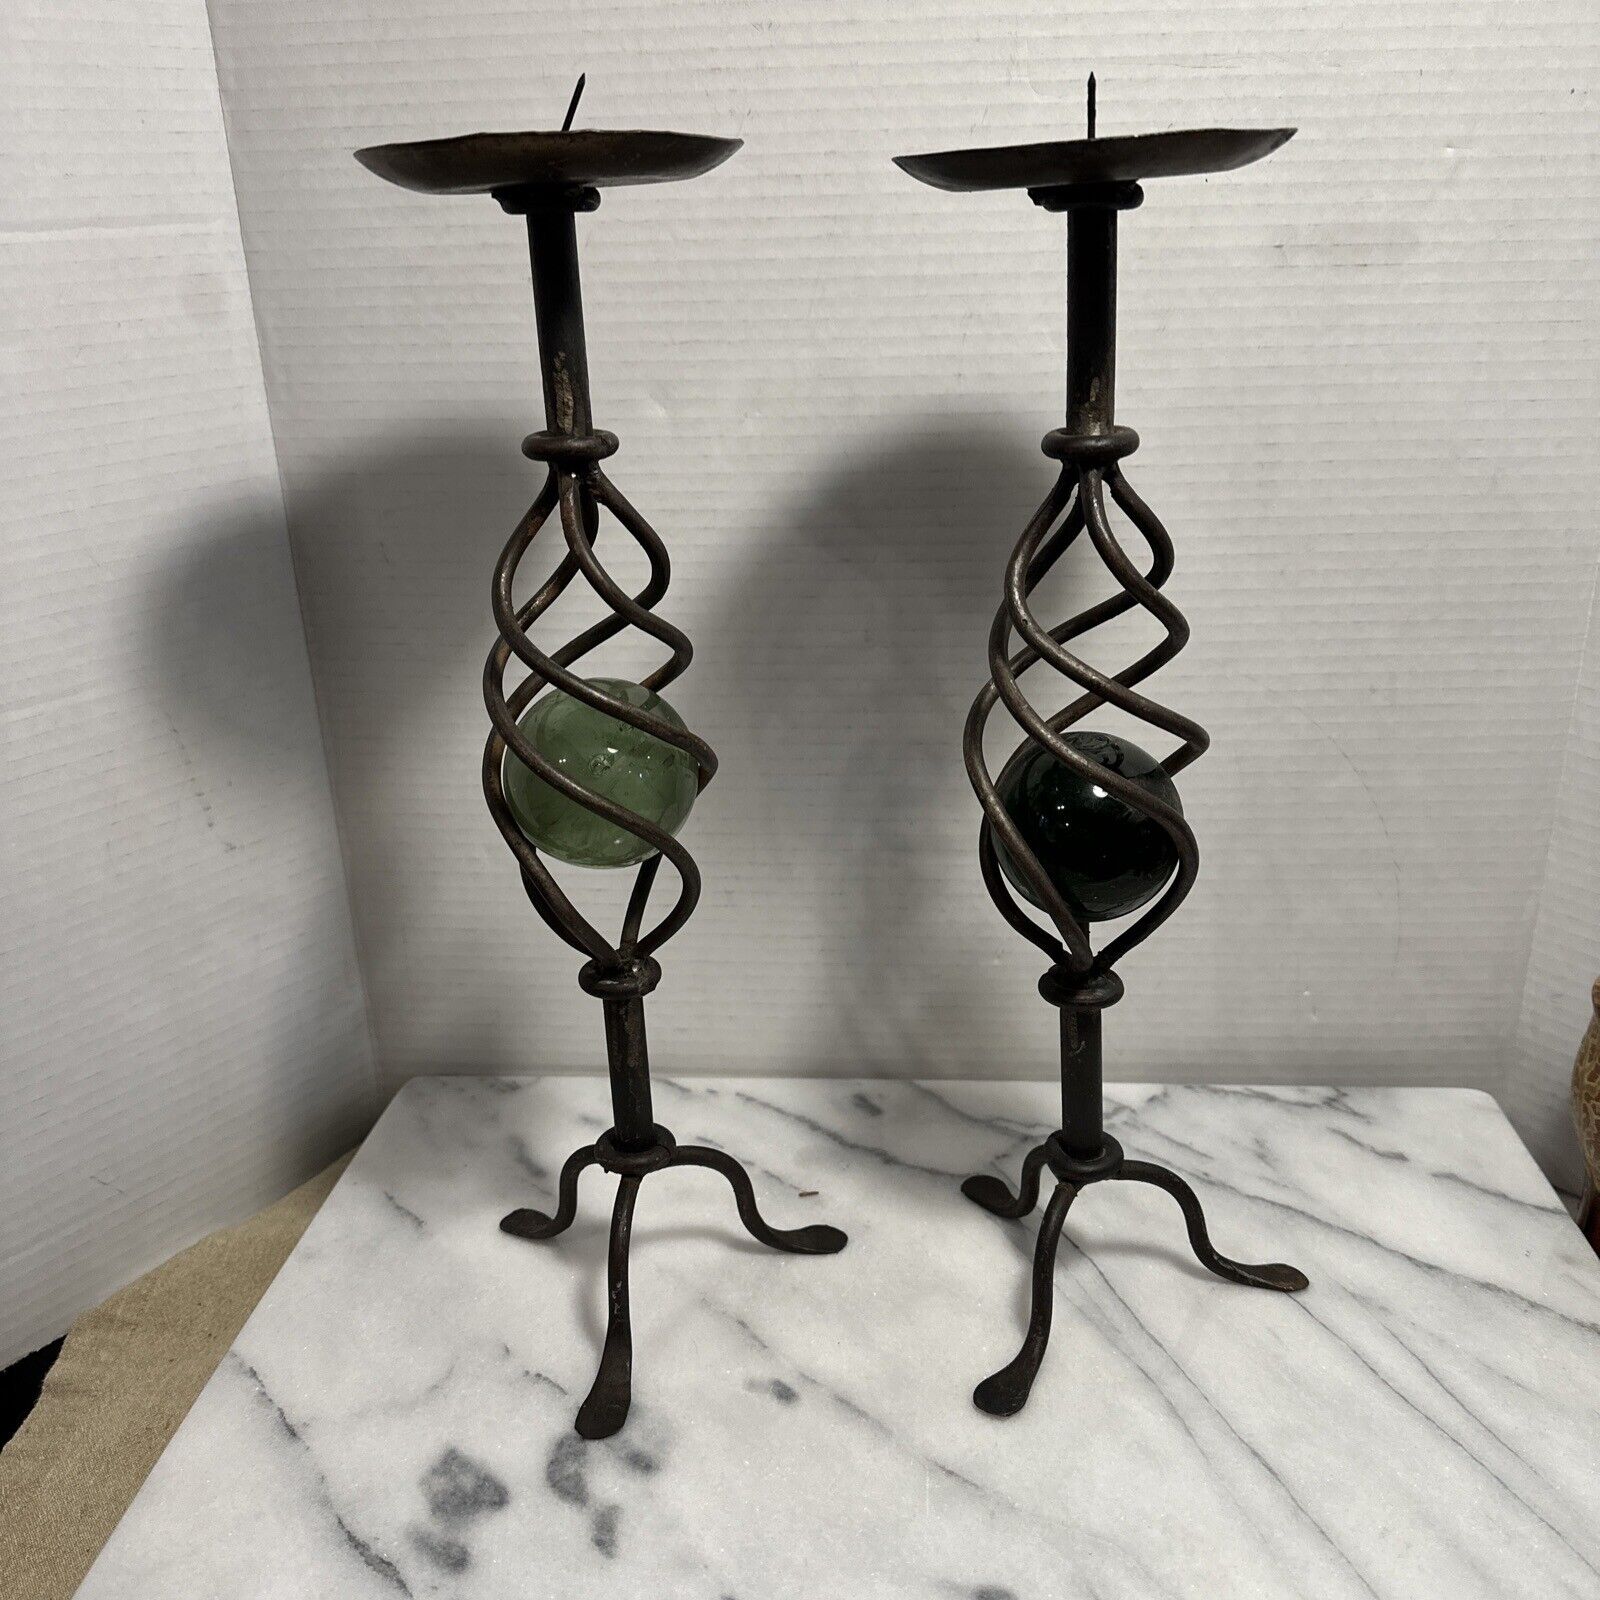 Candle Holders Wrought Iron Braided Torchiere Style Glass Ball Insert Set Of 2